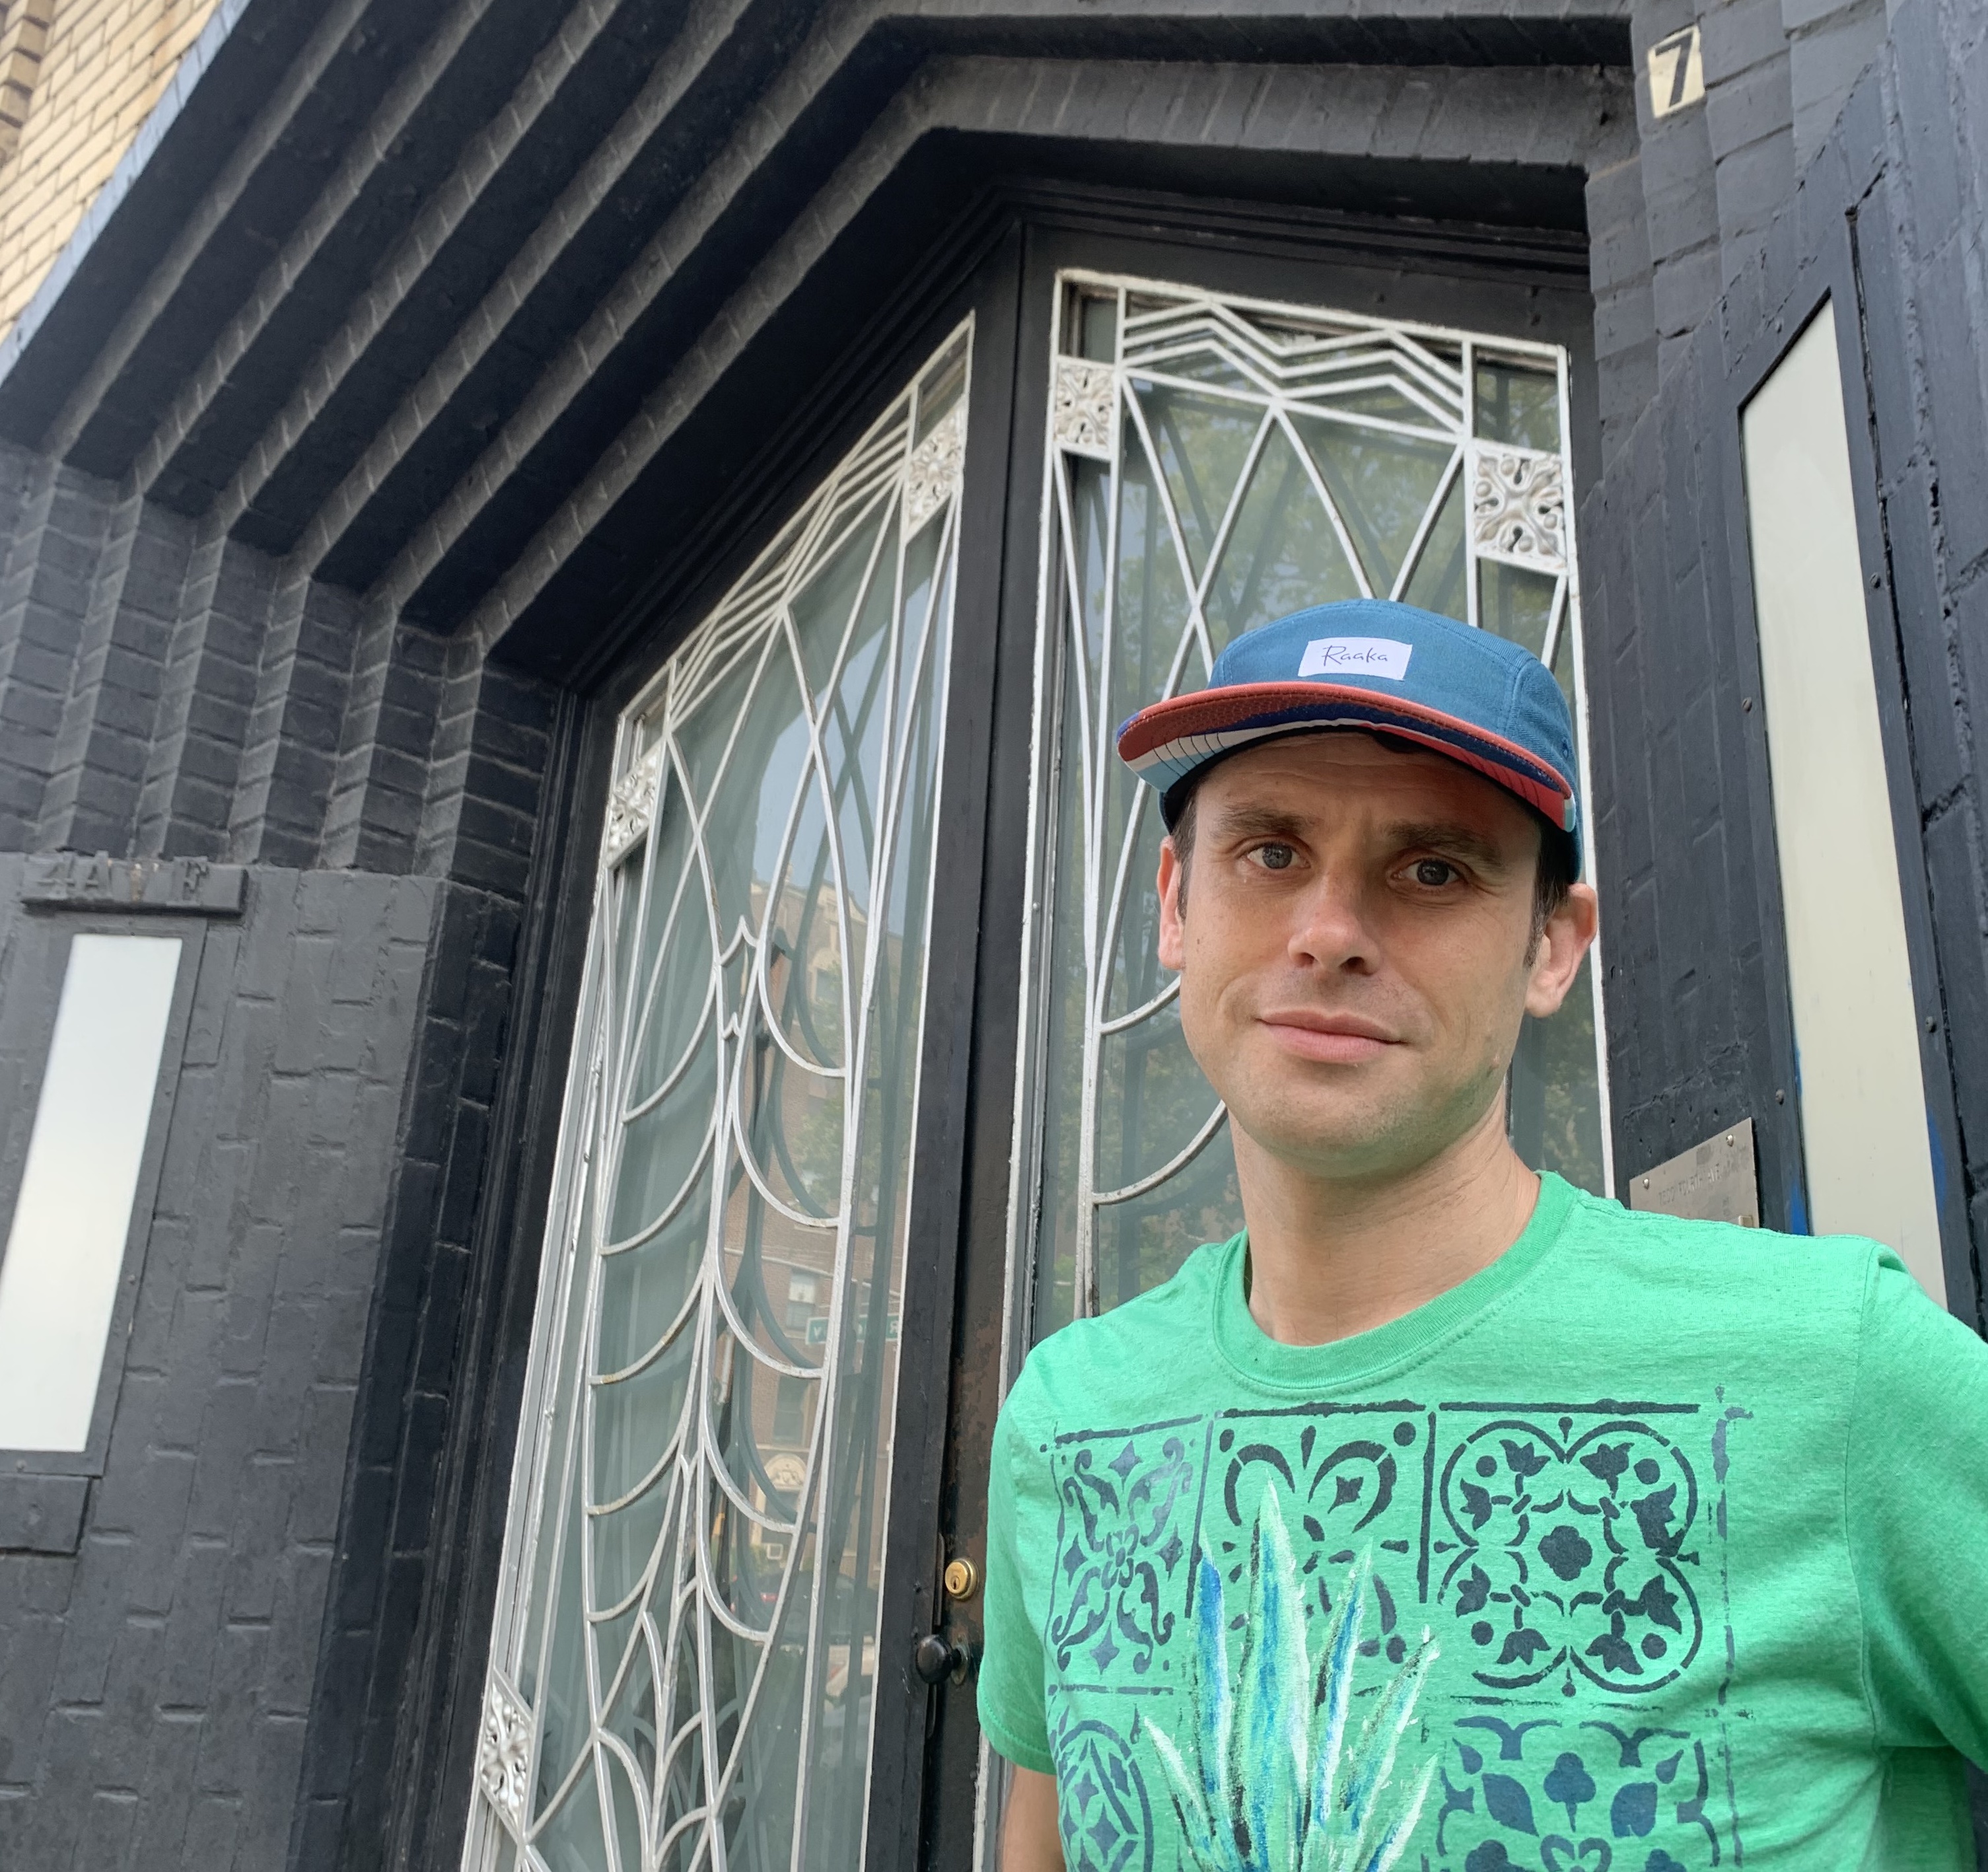 Greg wearing a green graphic shirt and blue hat standing in front of an elaborate door.